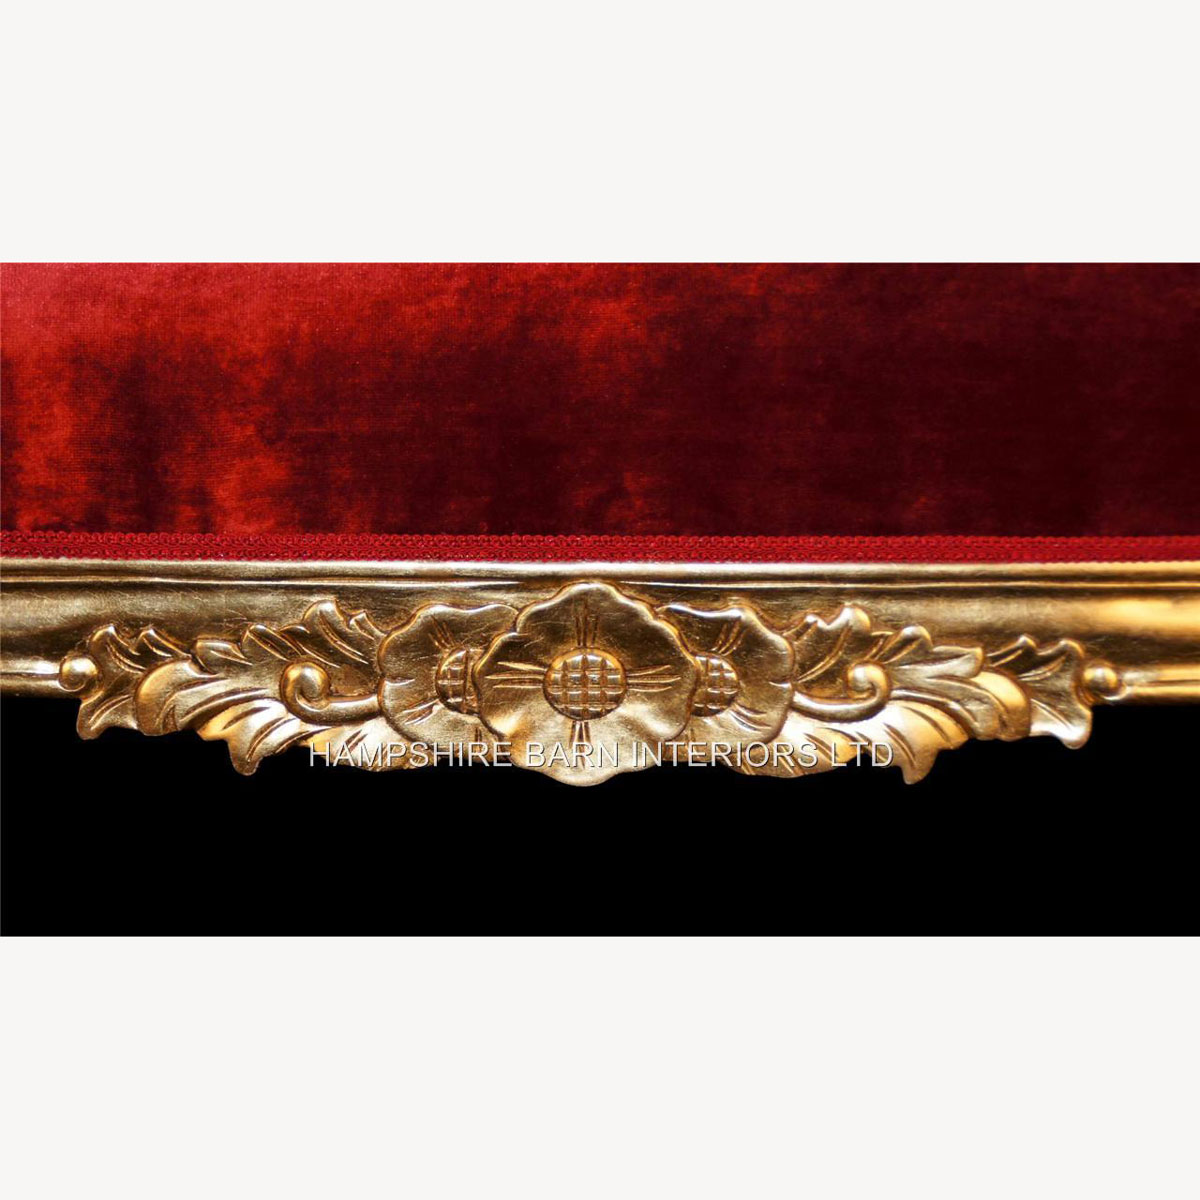 Beautiful Large Gold Leaf Red Velvet Hampshire Chaise Longue Stunning 4 - Hampshire Barn Interiors - Beautiful Large Gold Leaf & Red Velvet Hampshire Chaise Longue Stunning -